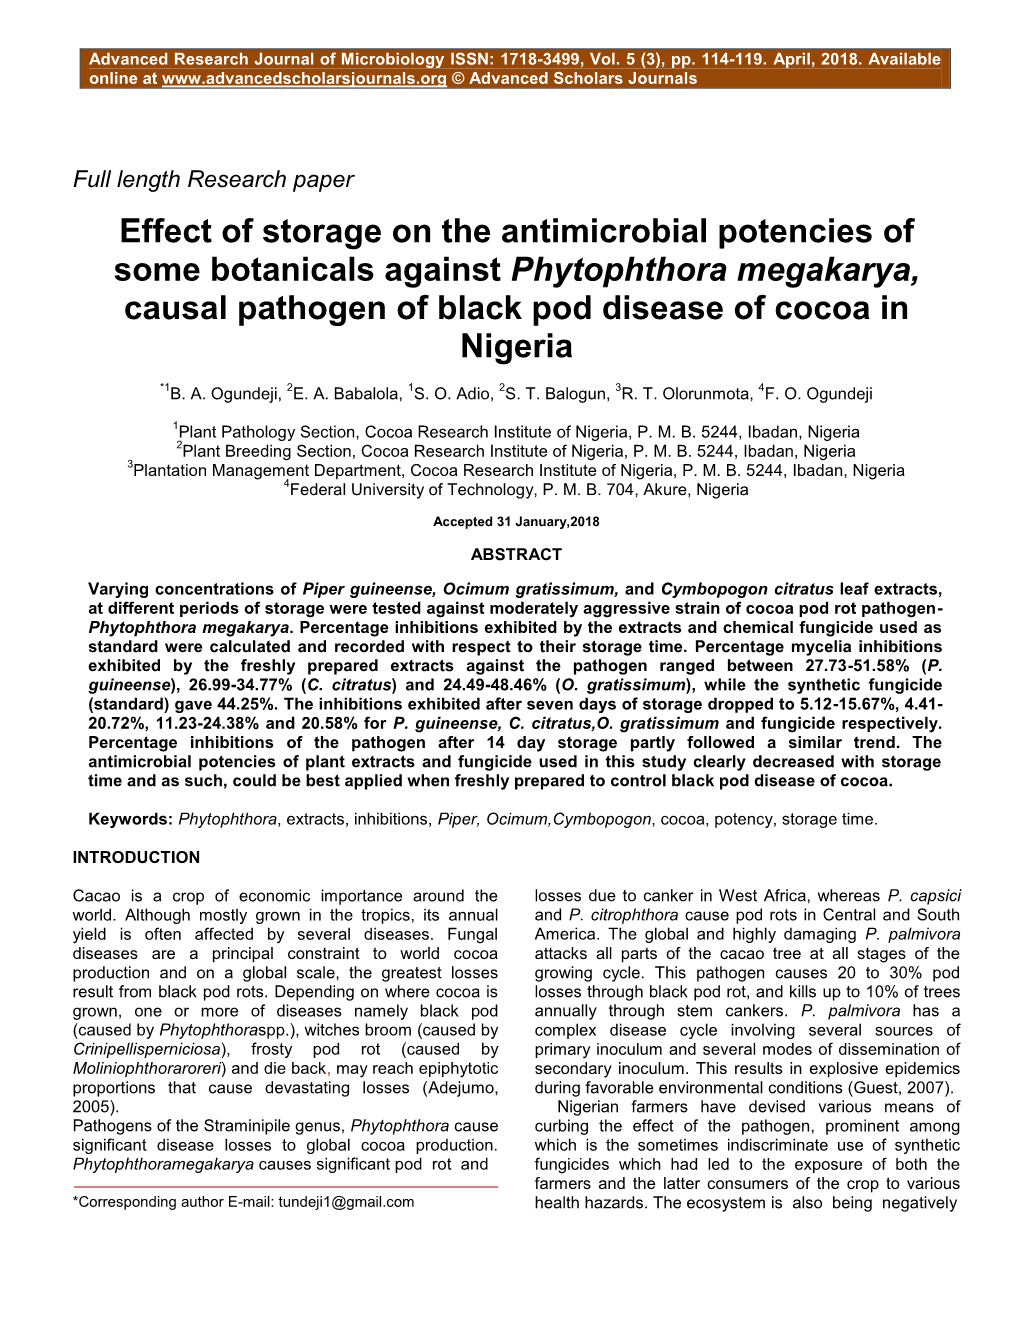 Effect of Storage on the Antimicrobial Potencies of Some Botanicals Against Phytophthora Megakarya, Causal Pathogen of Black Pod Disease of Cocoa in Nigeria